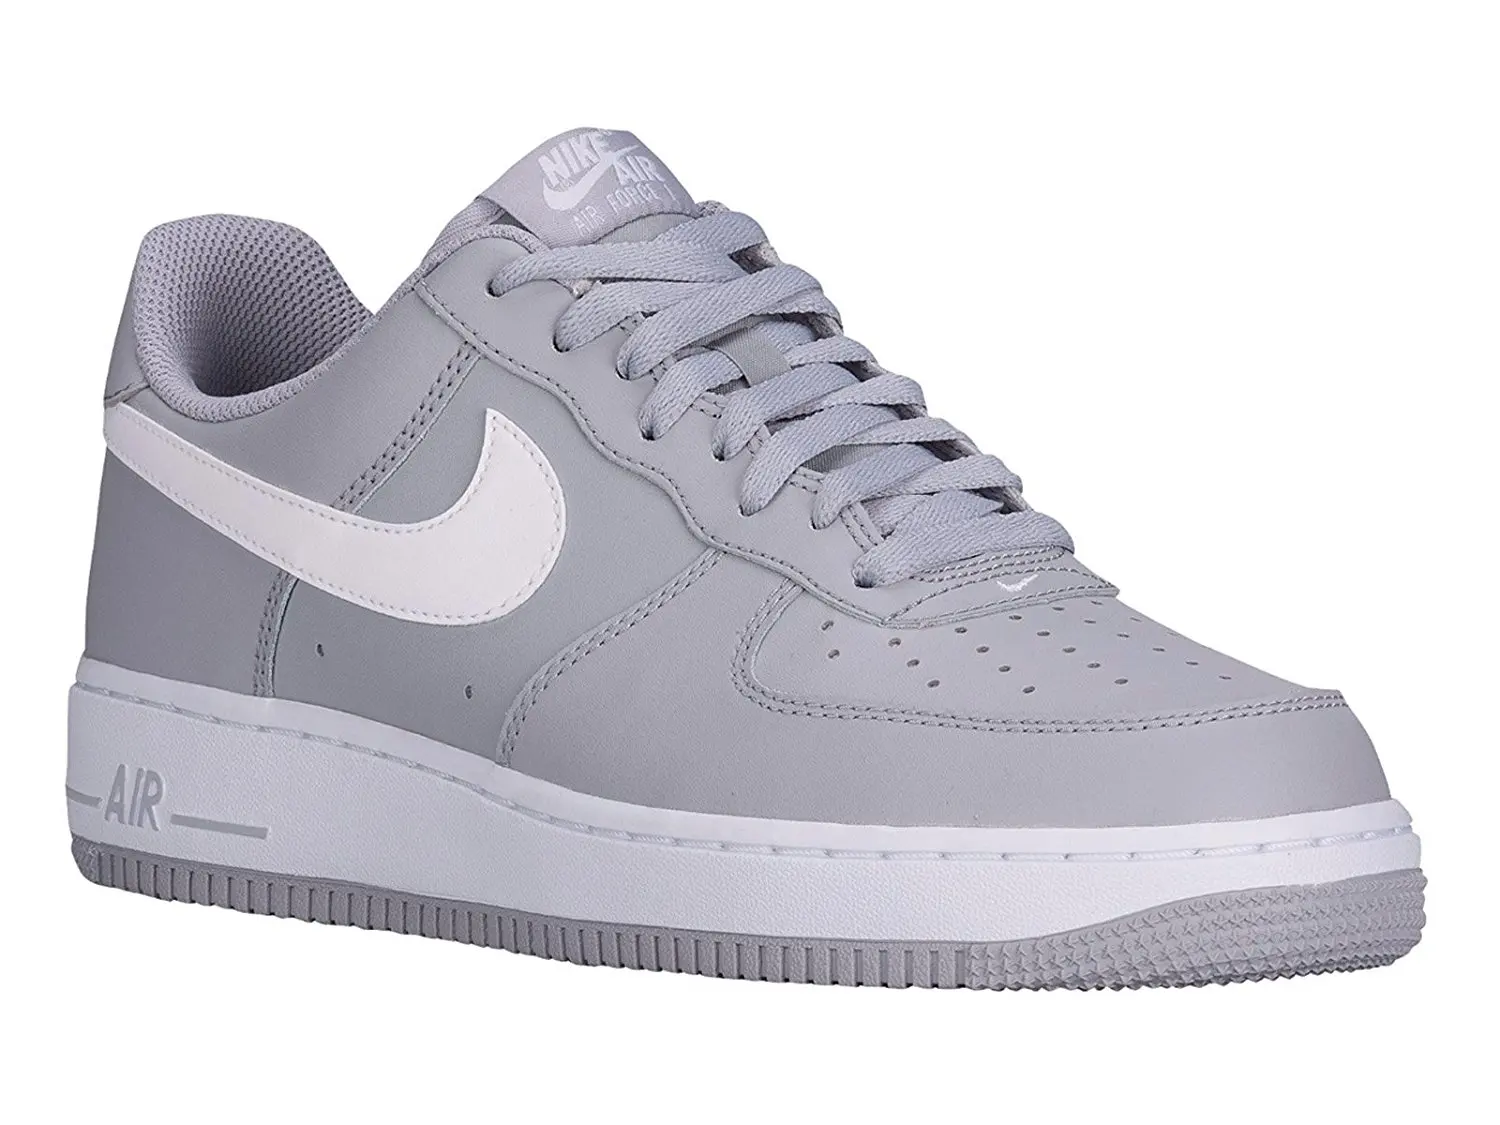 Buy Nike MenS Air Force 1 Low Casual Shoes in Cheap Price on Alibaba.com